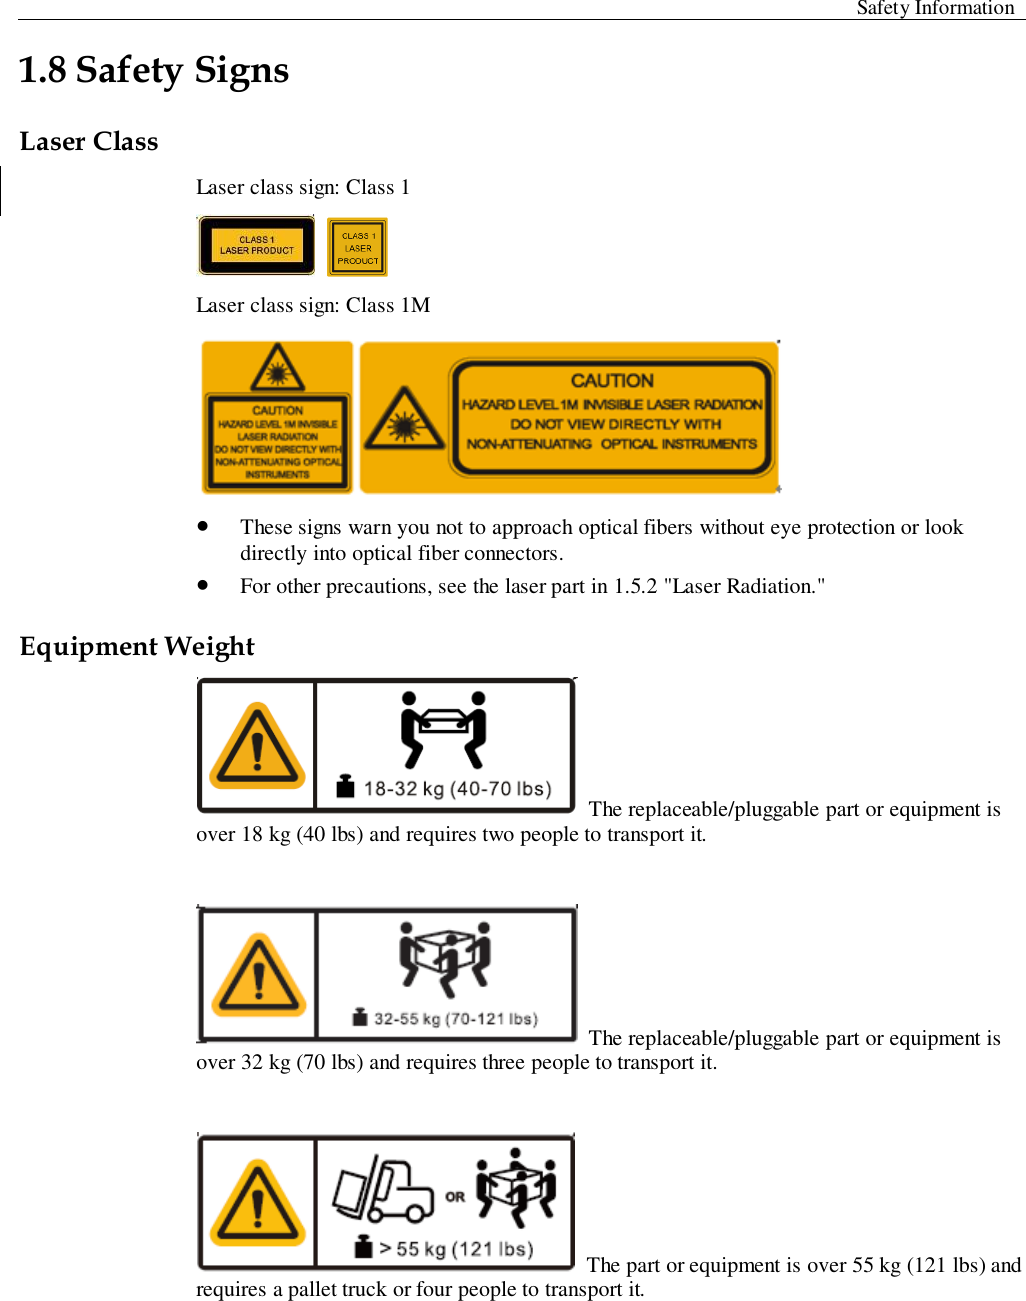  Safety Information  1.8 Safety Signs   Laser Class Laser class sign: Class 1    Laser class sign: Class 1M   These signs warn you not to approach optical fibers without eye protection or look directly into optical fiber connectors.    For other precautions, see the laser part in 1.5.2 &quot;Laser Radiation.&quot;   Equipment Weight  The replaceable/pluggable part or equipment is over 18 kg (40 lbs) and requires two people to transport it.     The replaceable/pluggable part or equipment is over 32 kg (70 lbs) and requires three people to transport it.     The part or equipment is over 55 kg (121 lbs) and requires a pallet truck or four people to transport it.   